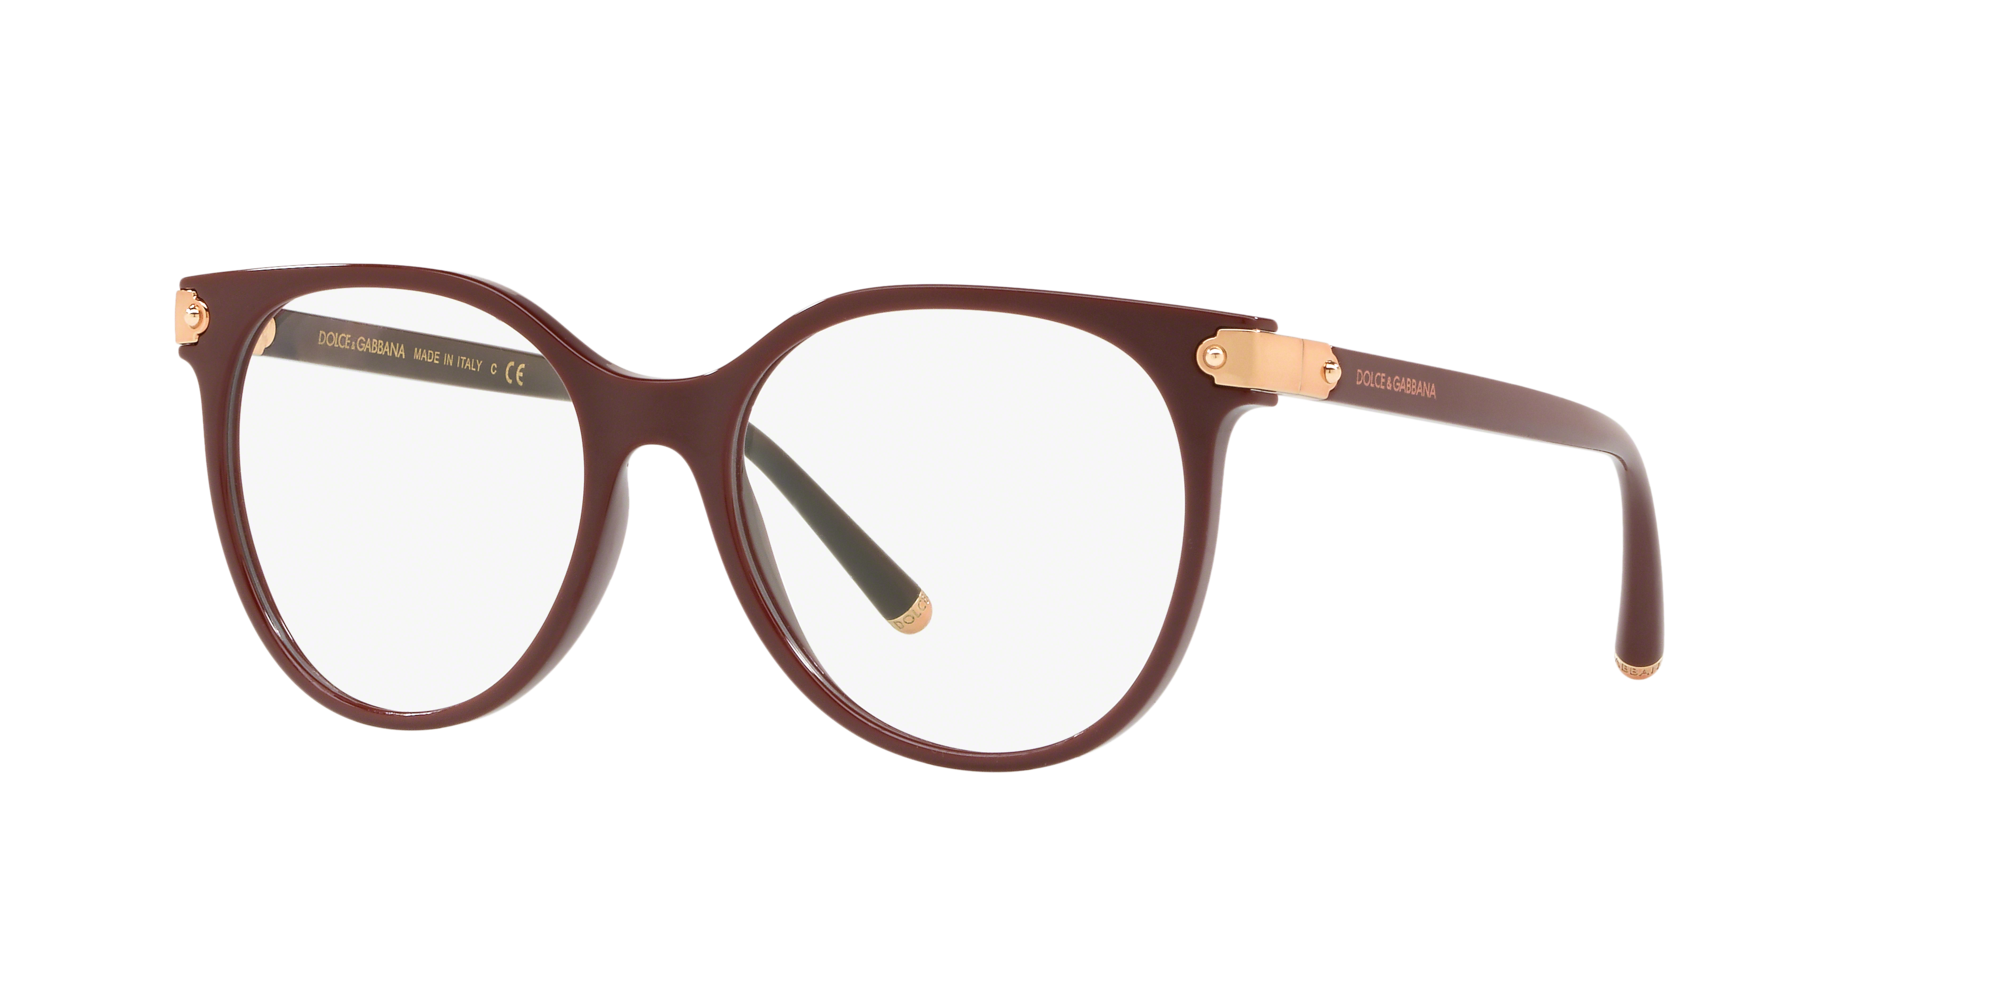 dolce and gabbana eyeglasses lenscrafters